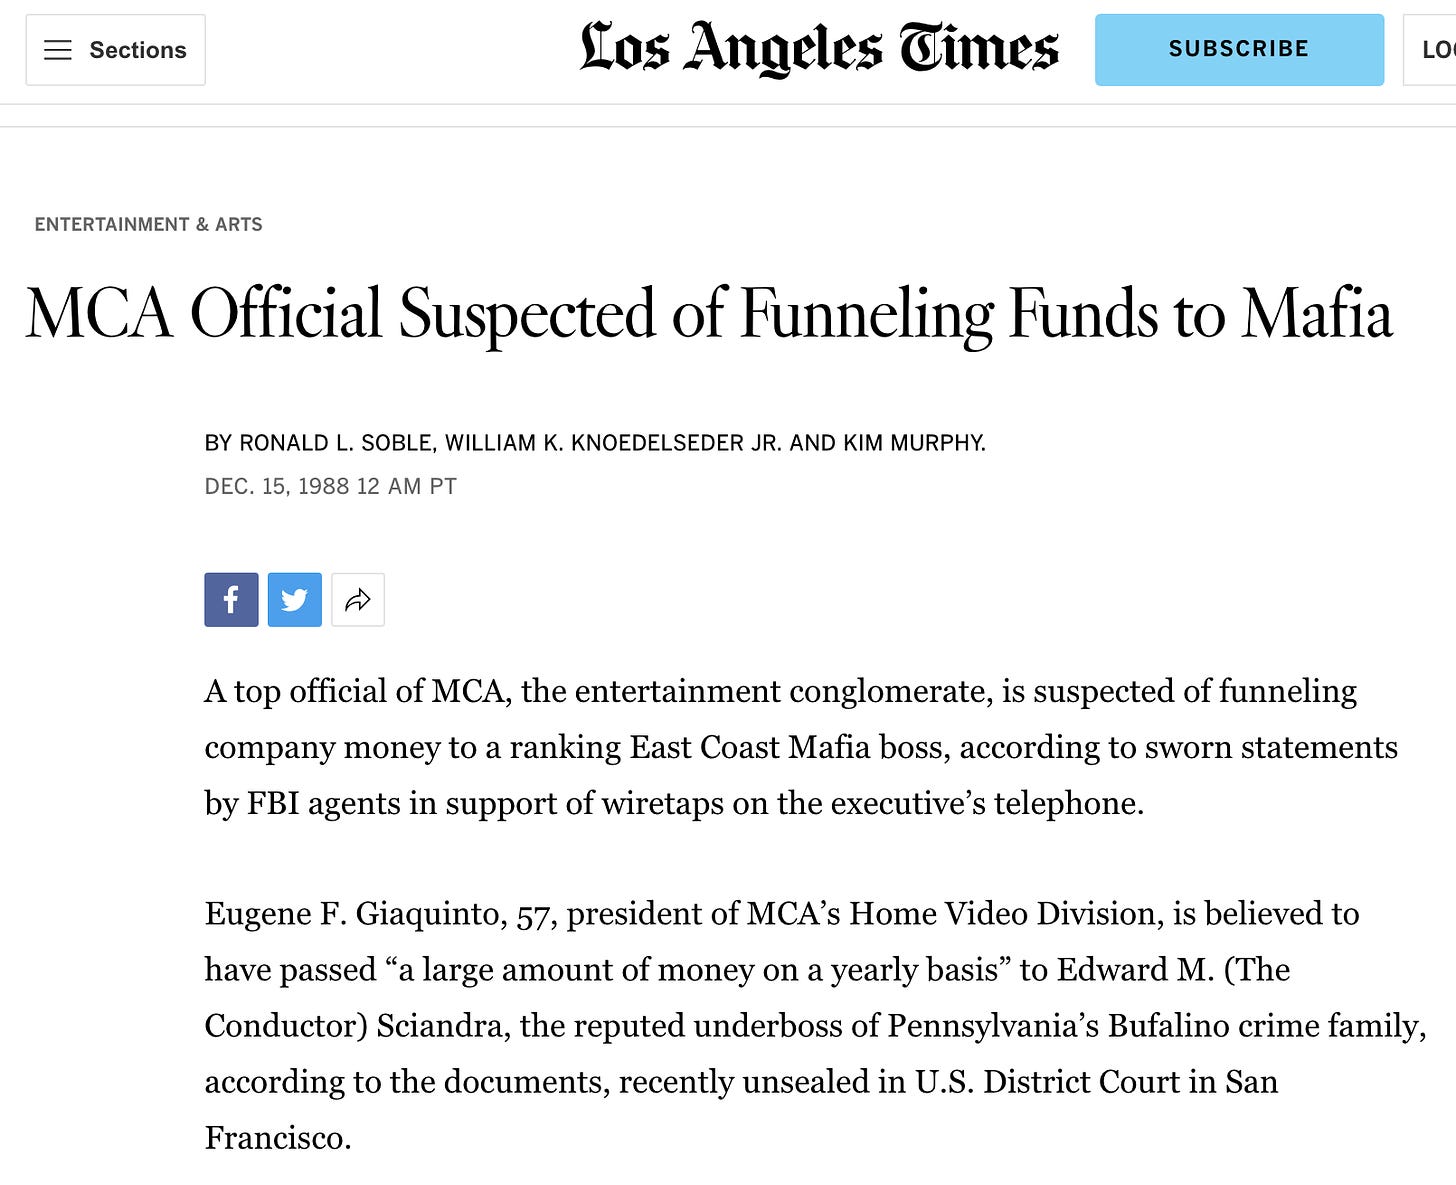 A top official of MCA, the entertainment conglomerate, is suspected of funneling company money to a ranking East Coast Mafia boss, according to sworn statements by FBI agents in support of wiretaps on the executive’s telephone.  Eugene F. Giaquinto, 57, president of MCA’s Home Video Division, is believed to have passed “a large amount of money on a yearly basis” to Edward M. (The Conductor) Sciandra, the reputed underboss of Pennsylvania’s Bufalino crime family, according to the documents, recently unsealed in U.S. District Court in San Francisco.  The money allegedly flowed to Sciandra through a Clifton, N.J.-based company, North Star Graphics, which has a $12-million to $15-million a year contract to package MCA’s home videocassettes, including the top-selling “E.T.: The Extra Terrestrial,” according to the affidavits. The documents do not say how much money allegedly went to Sciandra.